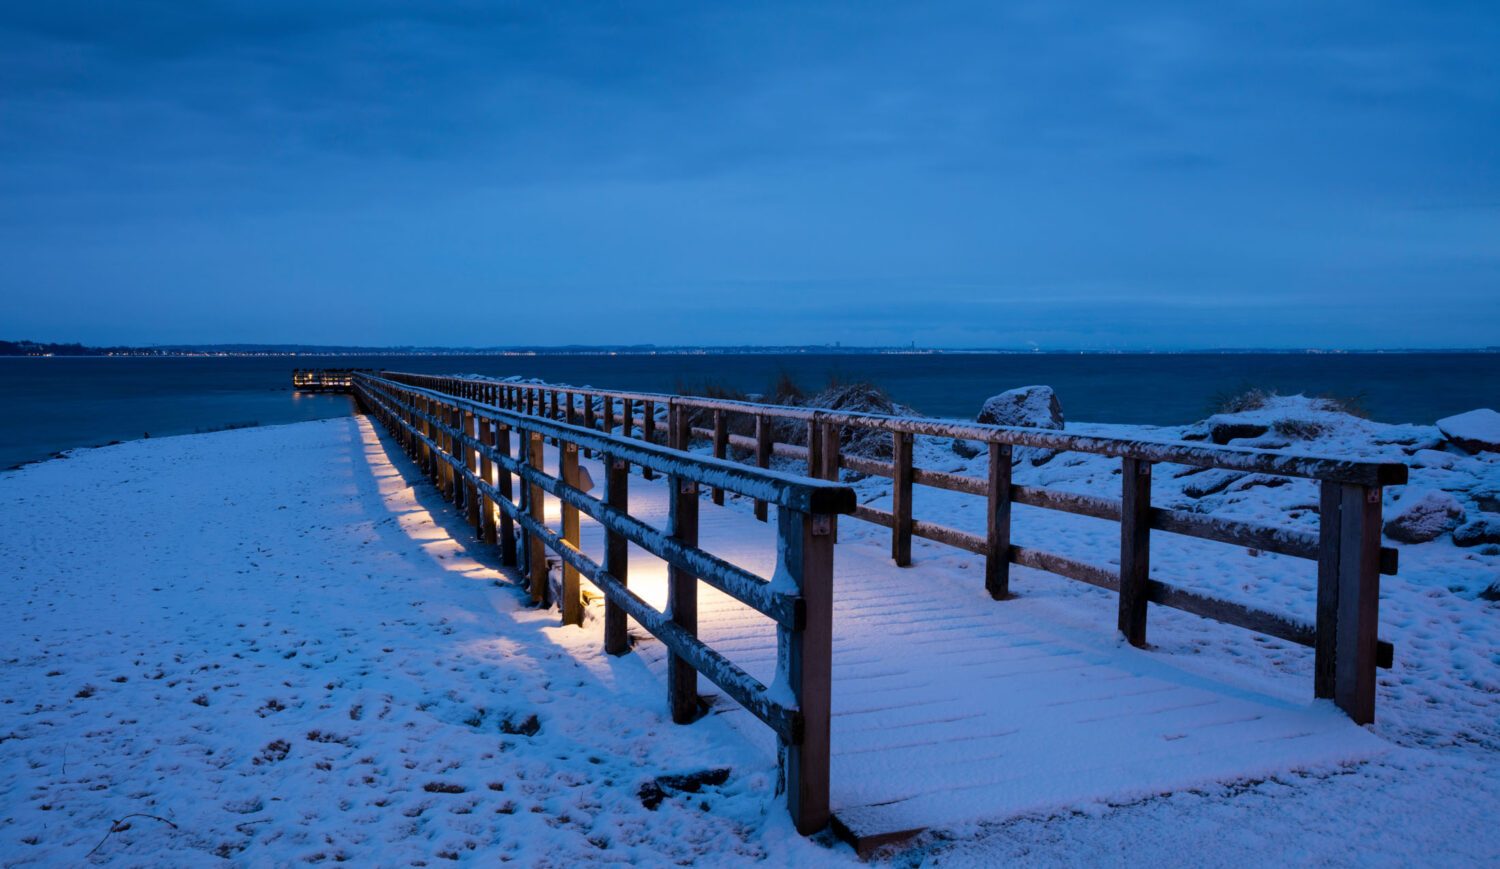 Snow is rather rare in Timmendorfer Strand, but when it has snowed, the atmosphere is particularly enchanting © lichtbildmaster - stock.adobe.com